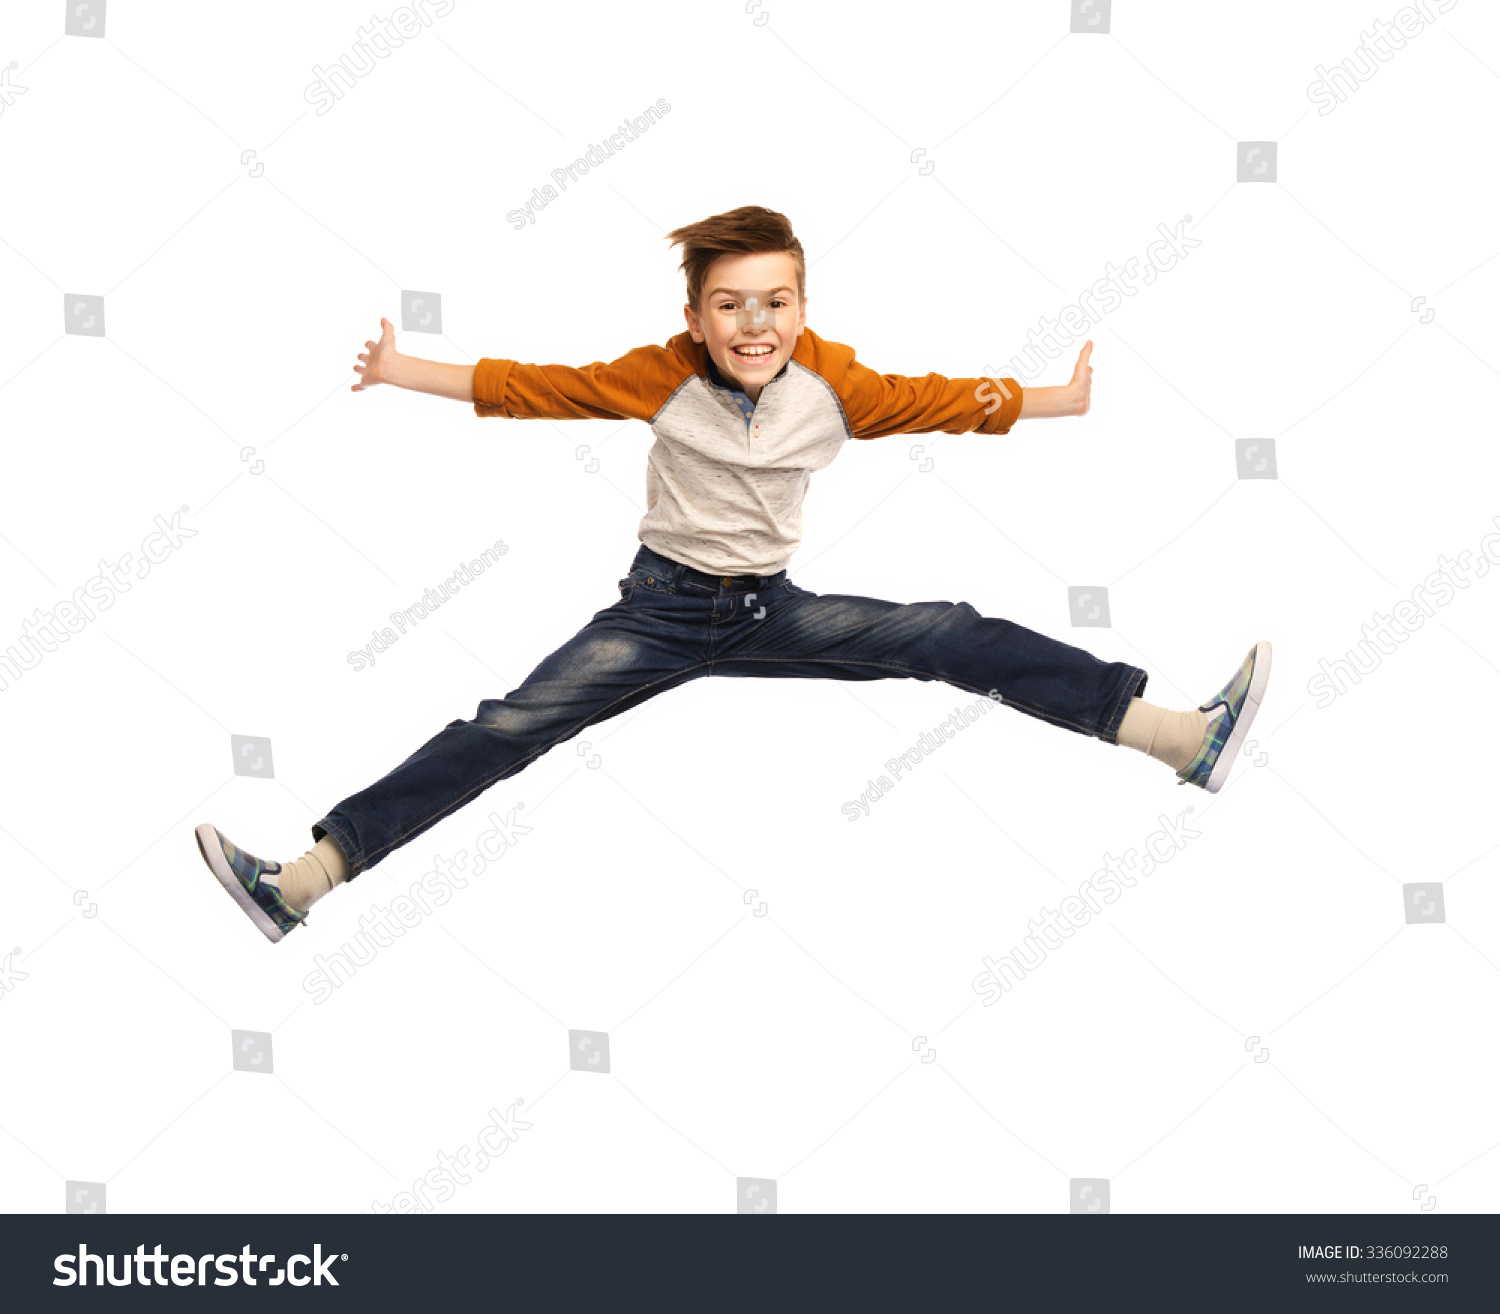 happiness, childhood, freedom, movement and people concept - happy smiling boy jumping in air #336092288